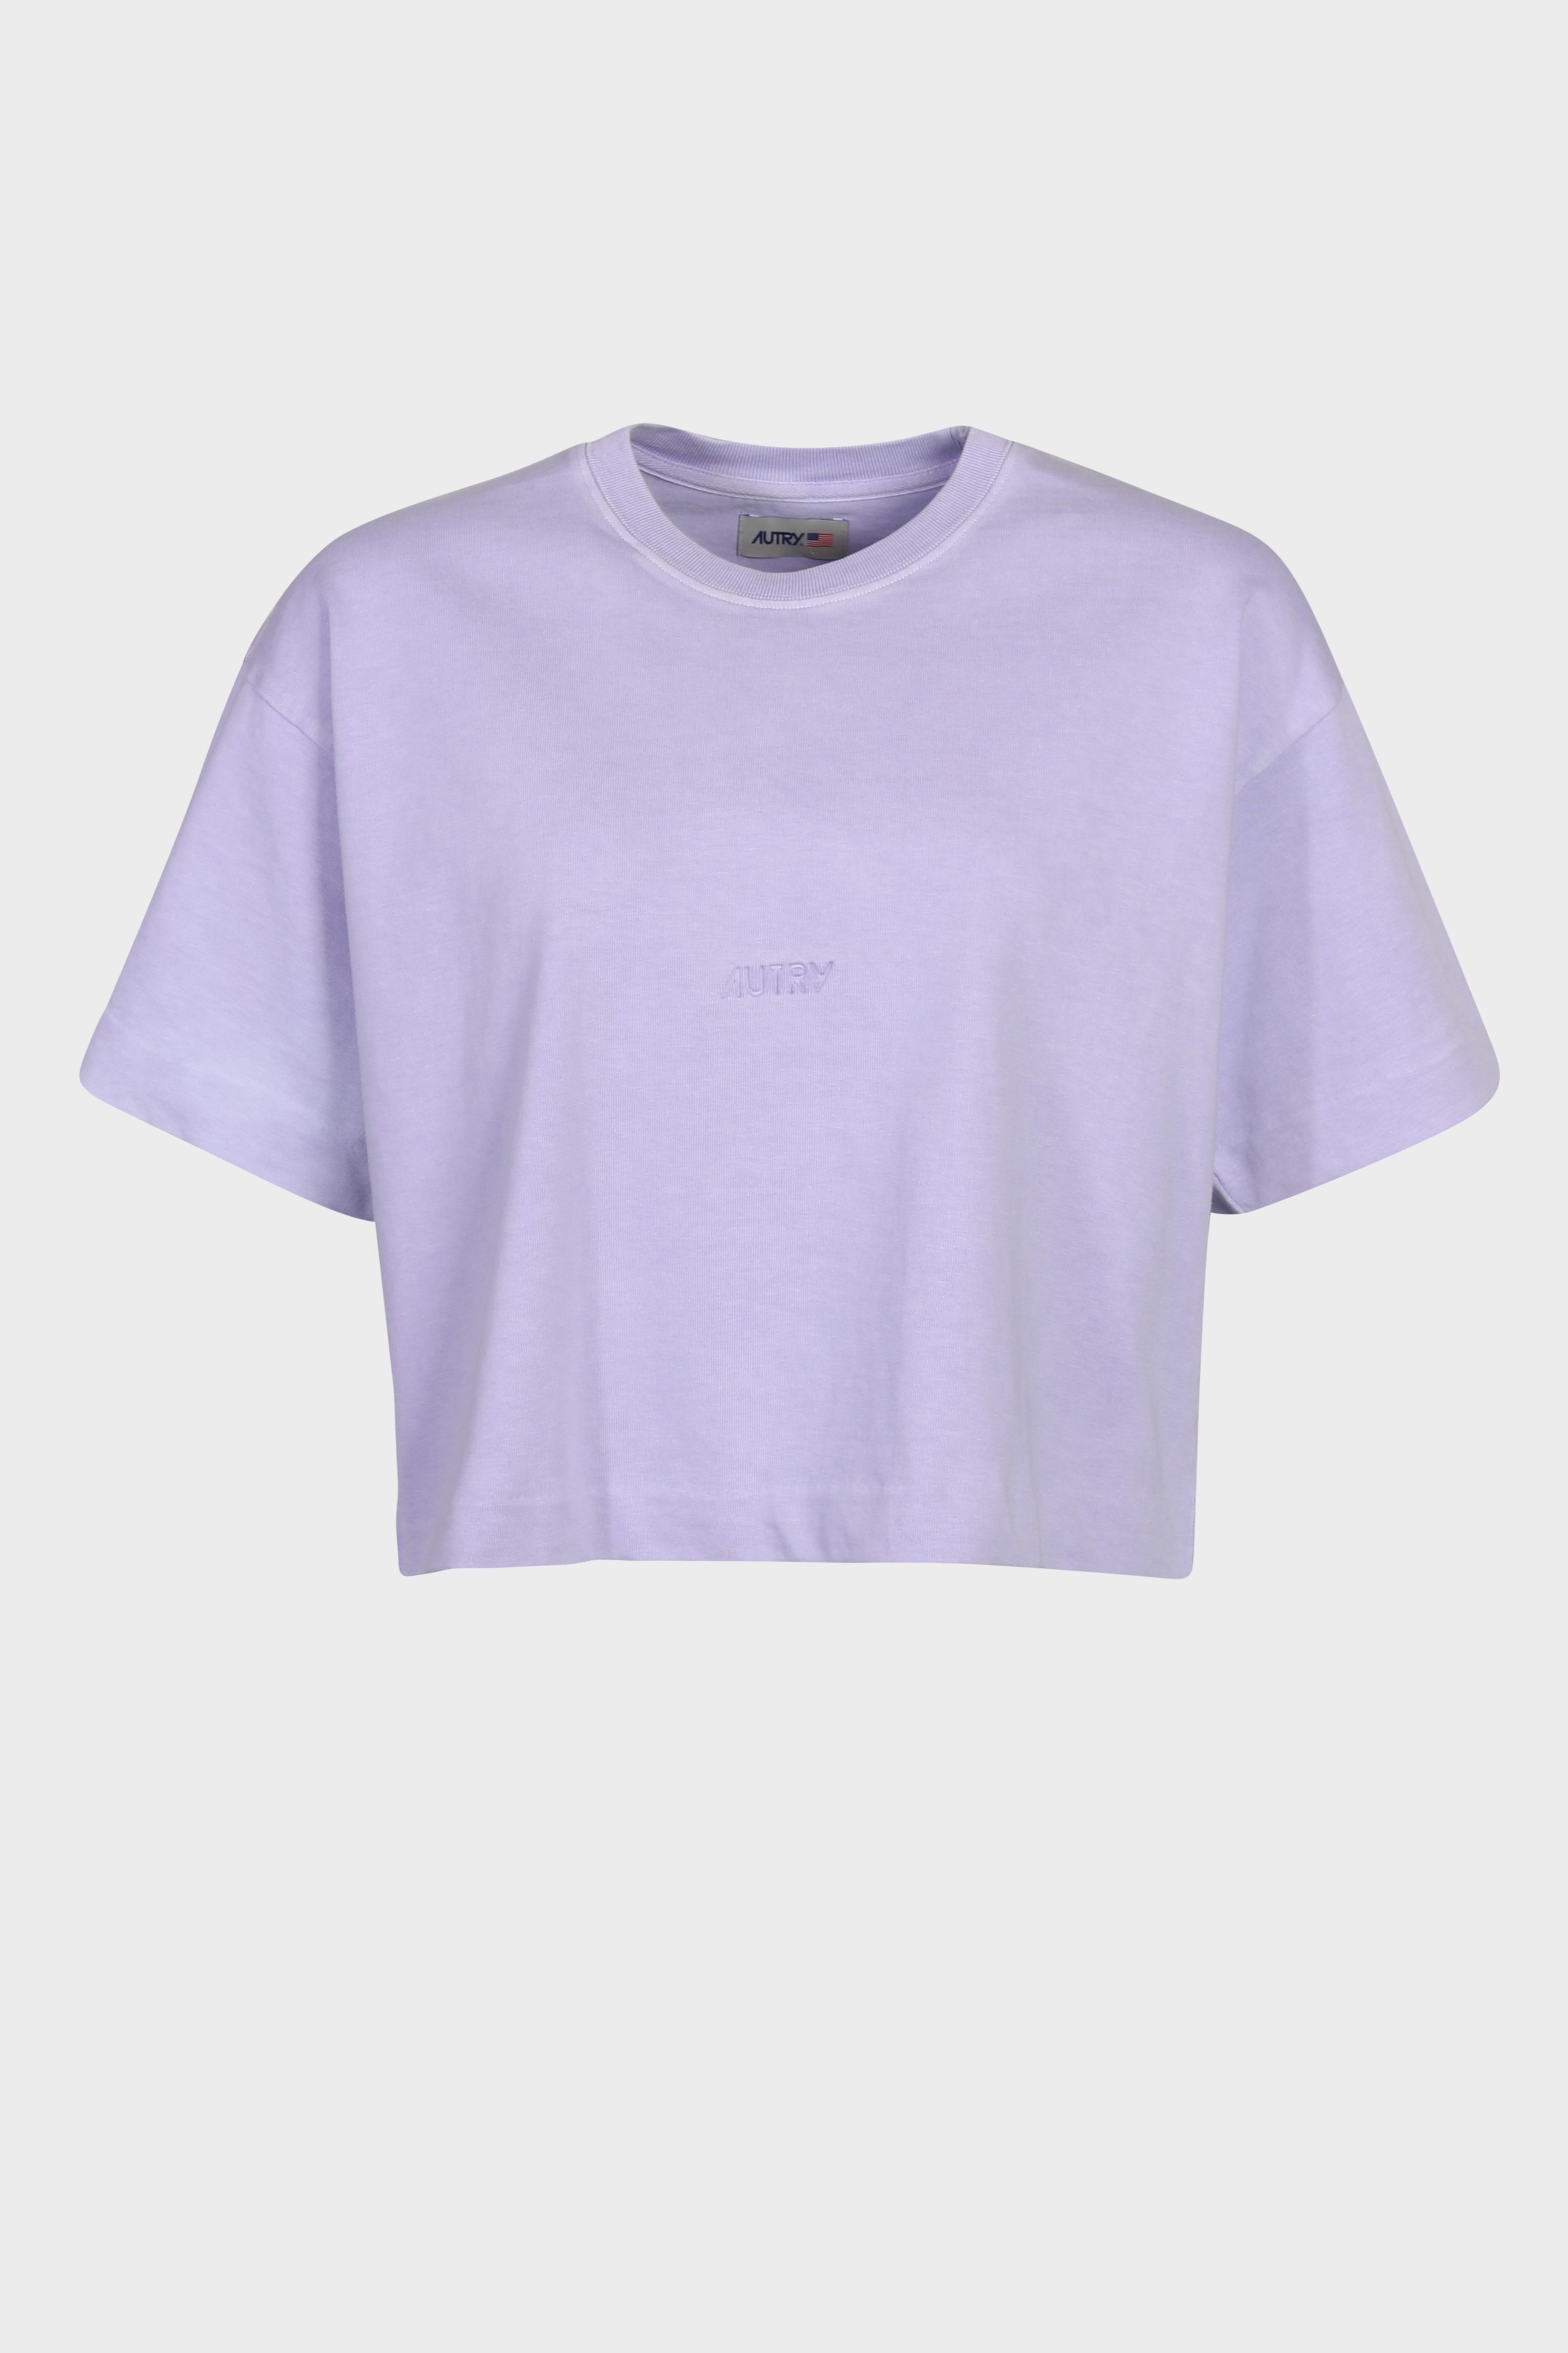 AUTRY ACTION PEOPLE Apparel T-Shirt in Lilac L